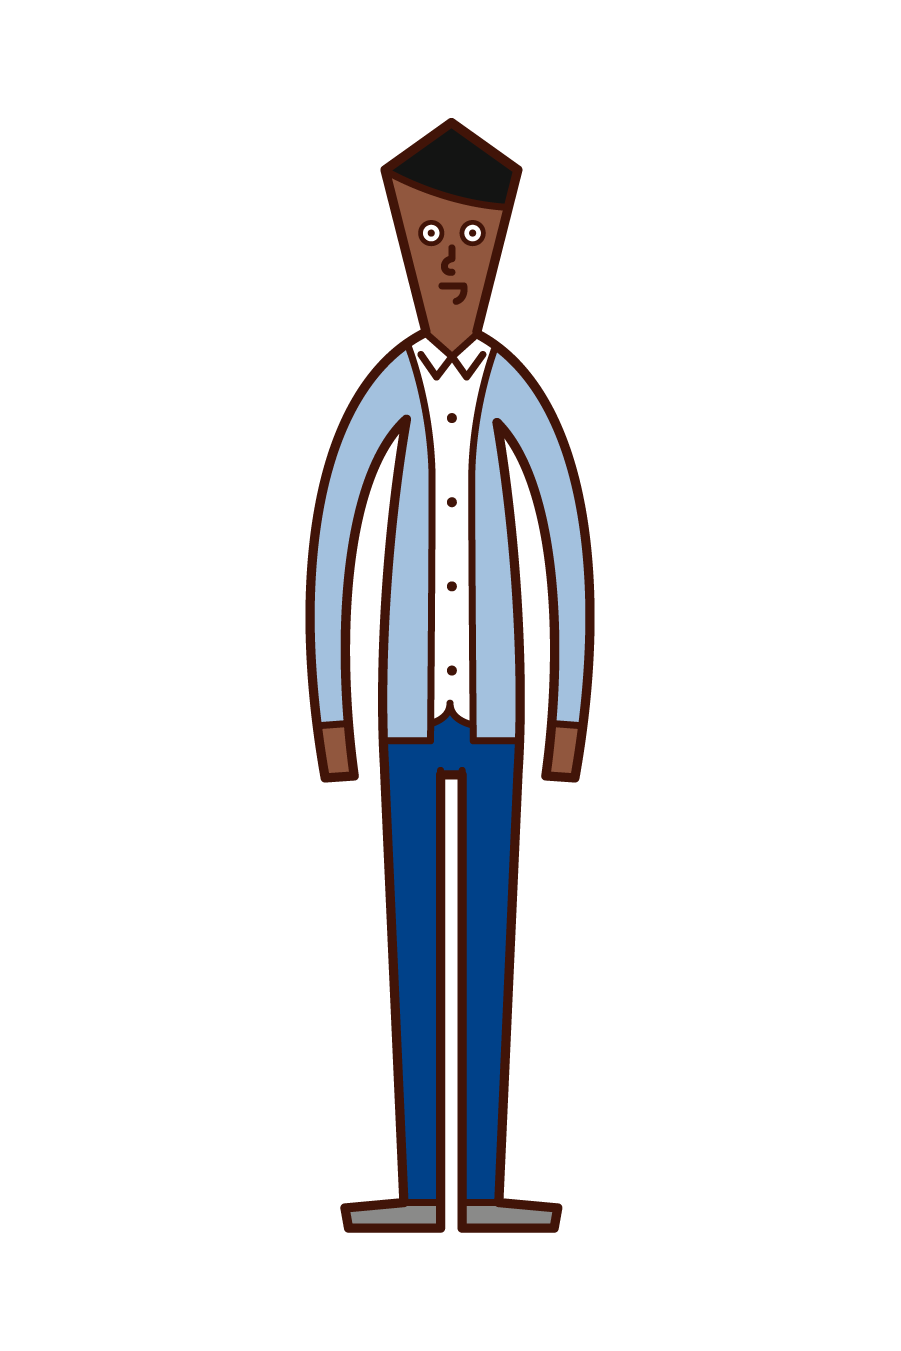 Illustration of a man wearing a cardigan